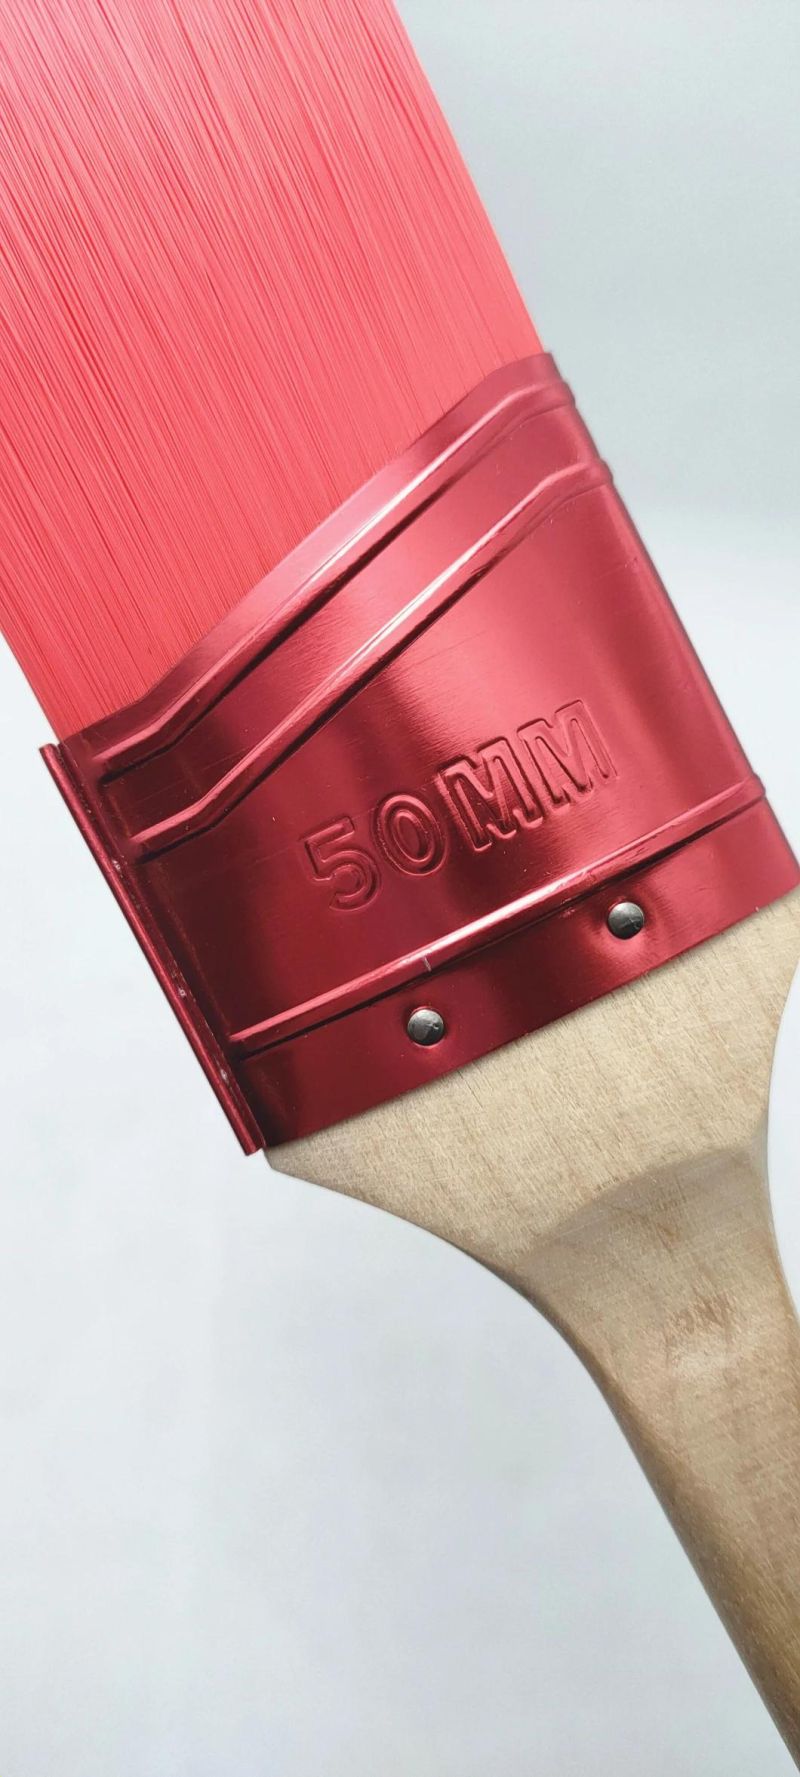 High Quality Factory Production Supports Custom Wooden Handle Paint Brushes